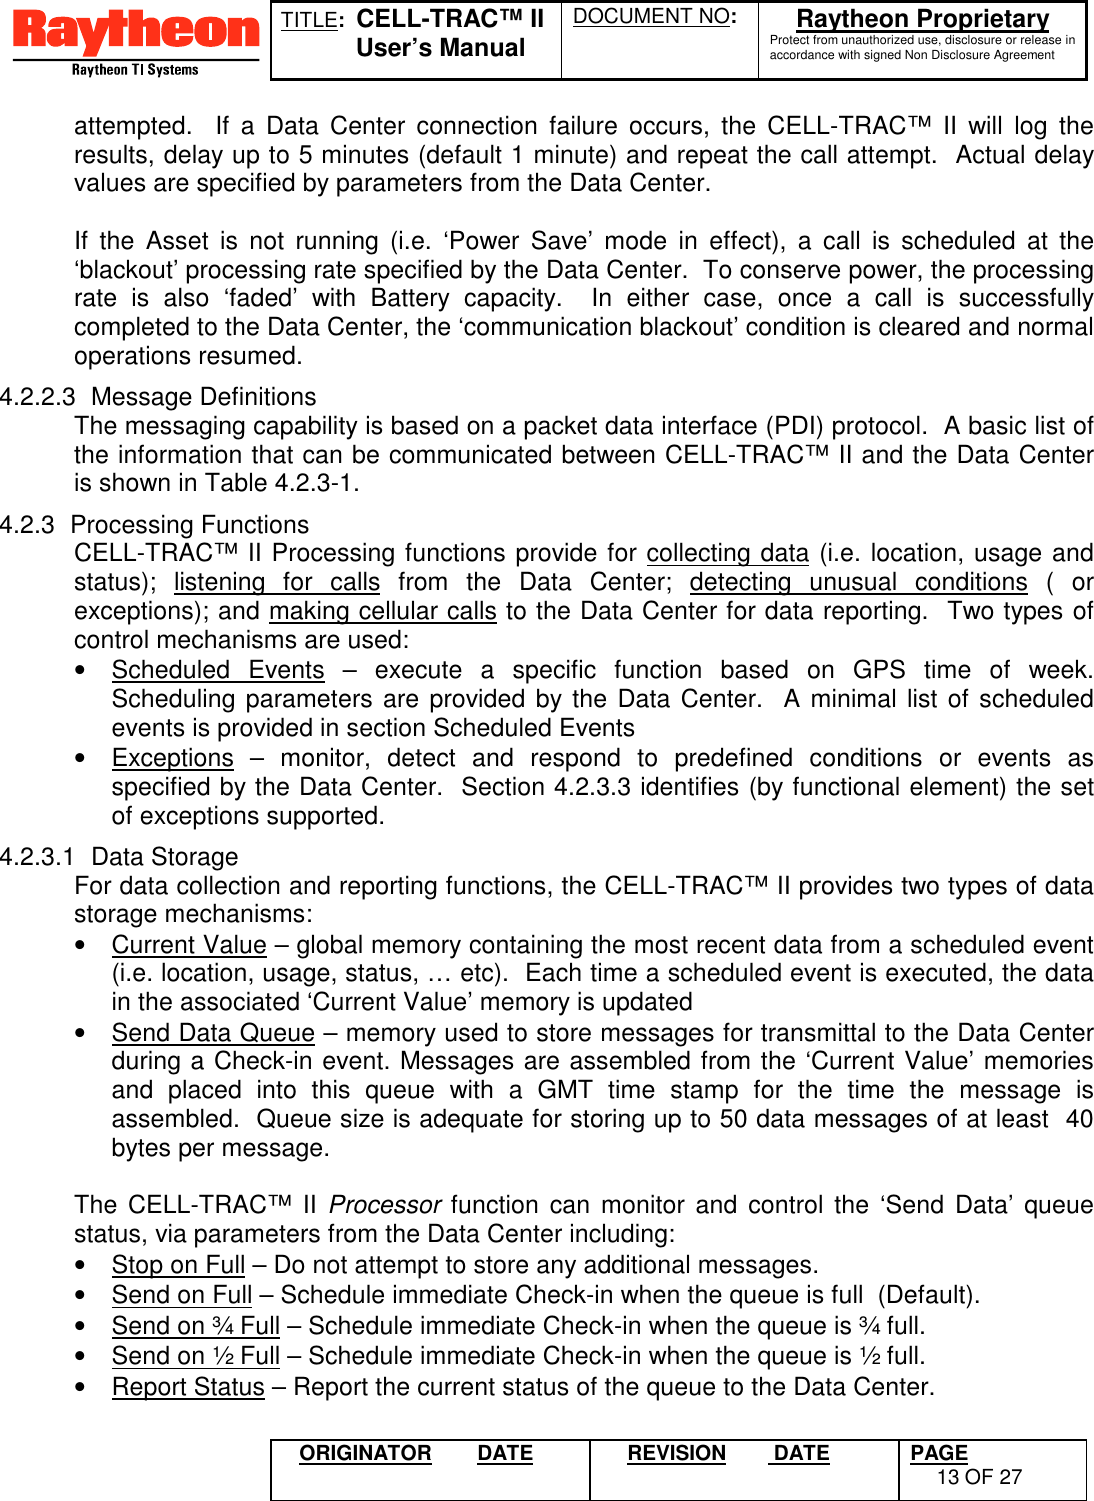 TITLE:  CELL-TRAC™ IIUser’s ManualDOCUMENT NO: Raytheon ProprietaryProtect from unauthorized use, disclosure or release inaccordance with signed Non Disclosure AgreementORIGINATOR DATE REVISION  DATE PAGE13 OF 27attempted.  If a Data Center connection failure occurs, the CELL-TRAC™ II will log theresults, delay up to 5 minutes (default 1 minute) and repeat the call attempt.  Actual delayvalues are specified by parameters from the Data Center.If the Asset is not running (i.e. ‘Power Save’ mode in effect), a call is scheduled at the‘blackout’ processing rate specified by the Data Center.  To conserve power, the processingrate is also ‘faded’ with Battery capacity.  In either case, once a call is successfullycompleted to the Data Center, the ‘communication blackout’ condition is cleared and normaloperations resumed.4.2.2.3 Message DefinitionsThe messaging capability is based on a packet data interface (PDI) protocol.  A basic list ofthe information that can be communicated between CELL-TRAC™ II and the Data Centeris shown in Table 4.2.3-1.4.2.3 Processing FunctionsCELL-TRAC™ II Processing functions provide for collecting data (i.e. location, usage andstatus); listening for calls from the Data Center; detecting unusual conditions ( orexceptions); and making cellular calls to the Data Center for data reporting.  Two types ofcontrol mechanisms are used:•  Scheduled Events – execute a specific function based on GPS time of week.Scheduling parameters are provided by the Data Center.  A minimal list of scheduledevents is provided in section Scheduled Events•  Exceptions – monitor, detect and respond to predefined conditions or events asspecified by the Data Center.  Section 4.2.3.3 identifies (by functional element) the setof exceptions supported.4.2.3.1 Data StorageFor data collection and reporting functions, the CELL-TRAC™ II provides two types of datastorage mechanisms:•  Current Value – global memory containing the most recent data from a scheduled event(i.e. location, usage, status, … etc).  Each time a scheduled event is executed, the datain the associated ‘Current Value’ memory is updated•  Send Data Queue – memory used to store messages for transmittal to the Data Centerduring a Check-in event. Messages are assembled from the ‘Current Value’ memoriesand placed into this queue with a GMT time stamp for the time the message isassembled.  Queue size is adequate for storing up to 50 data messages of at least  40bytes per message.  The CELL-TRAC™ II Processor function can monitor and control the ‘Send Data’ queuestatus, via parameters from the Data Center including:•  Stop on Full – Do not attempt to store any additional messages.•  Send on Full – Schedule immediate Check-in when the queue is full  (Default).•  Send on ¾ Full – Schedule immediate Check-in when the queue is ¾ full.•  Send on ½ Full – Schedule immediate Check-in when the queue is ½ full.•  Report Status – Report the current status of the queue to the Data Center.